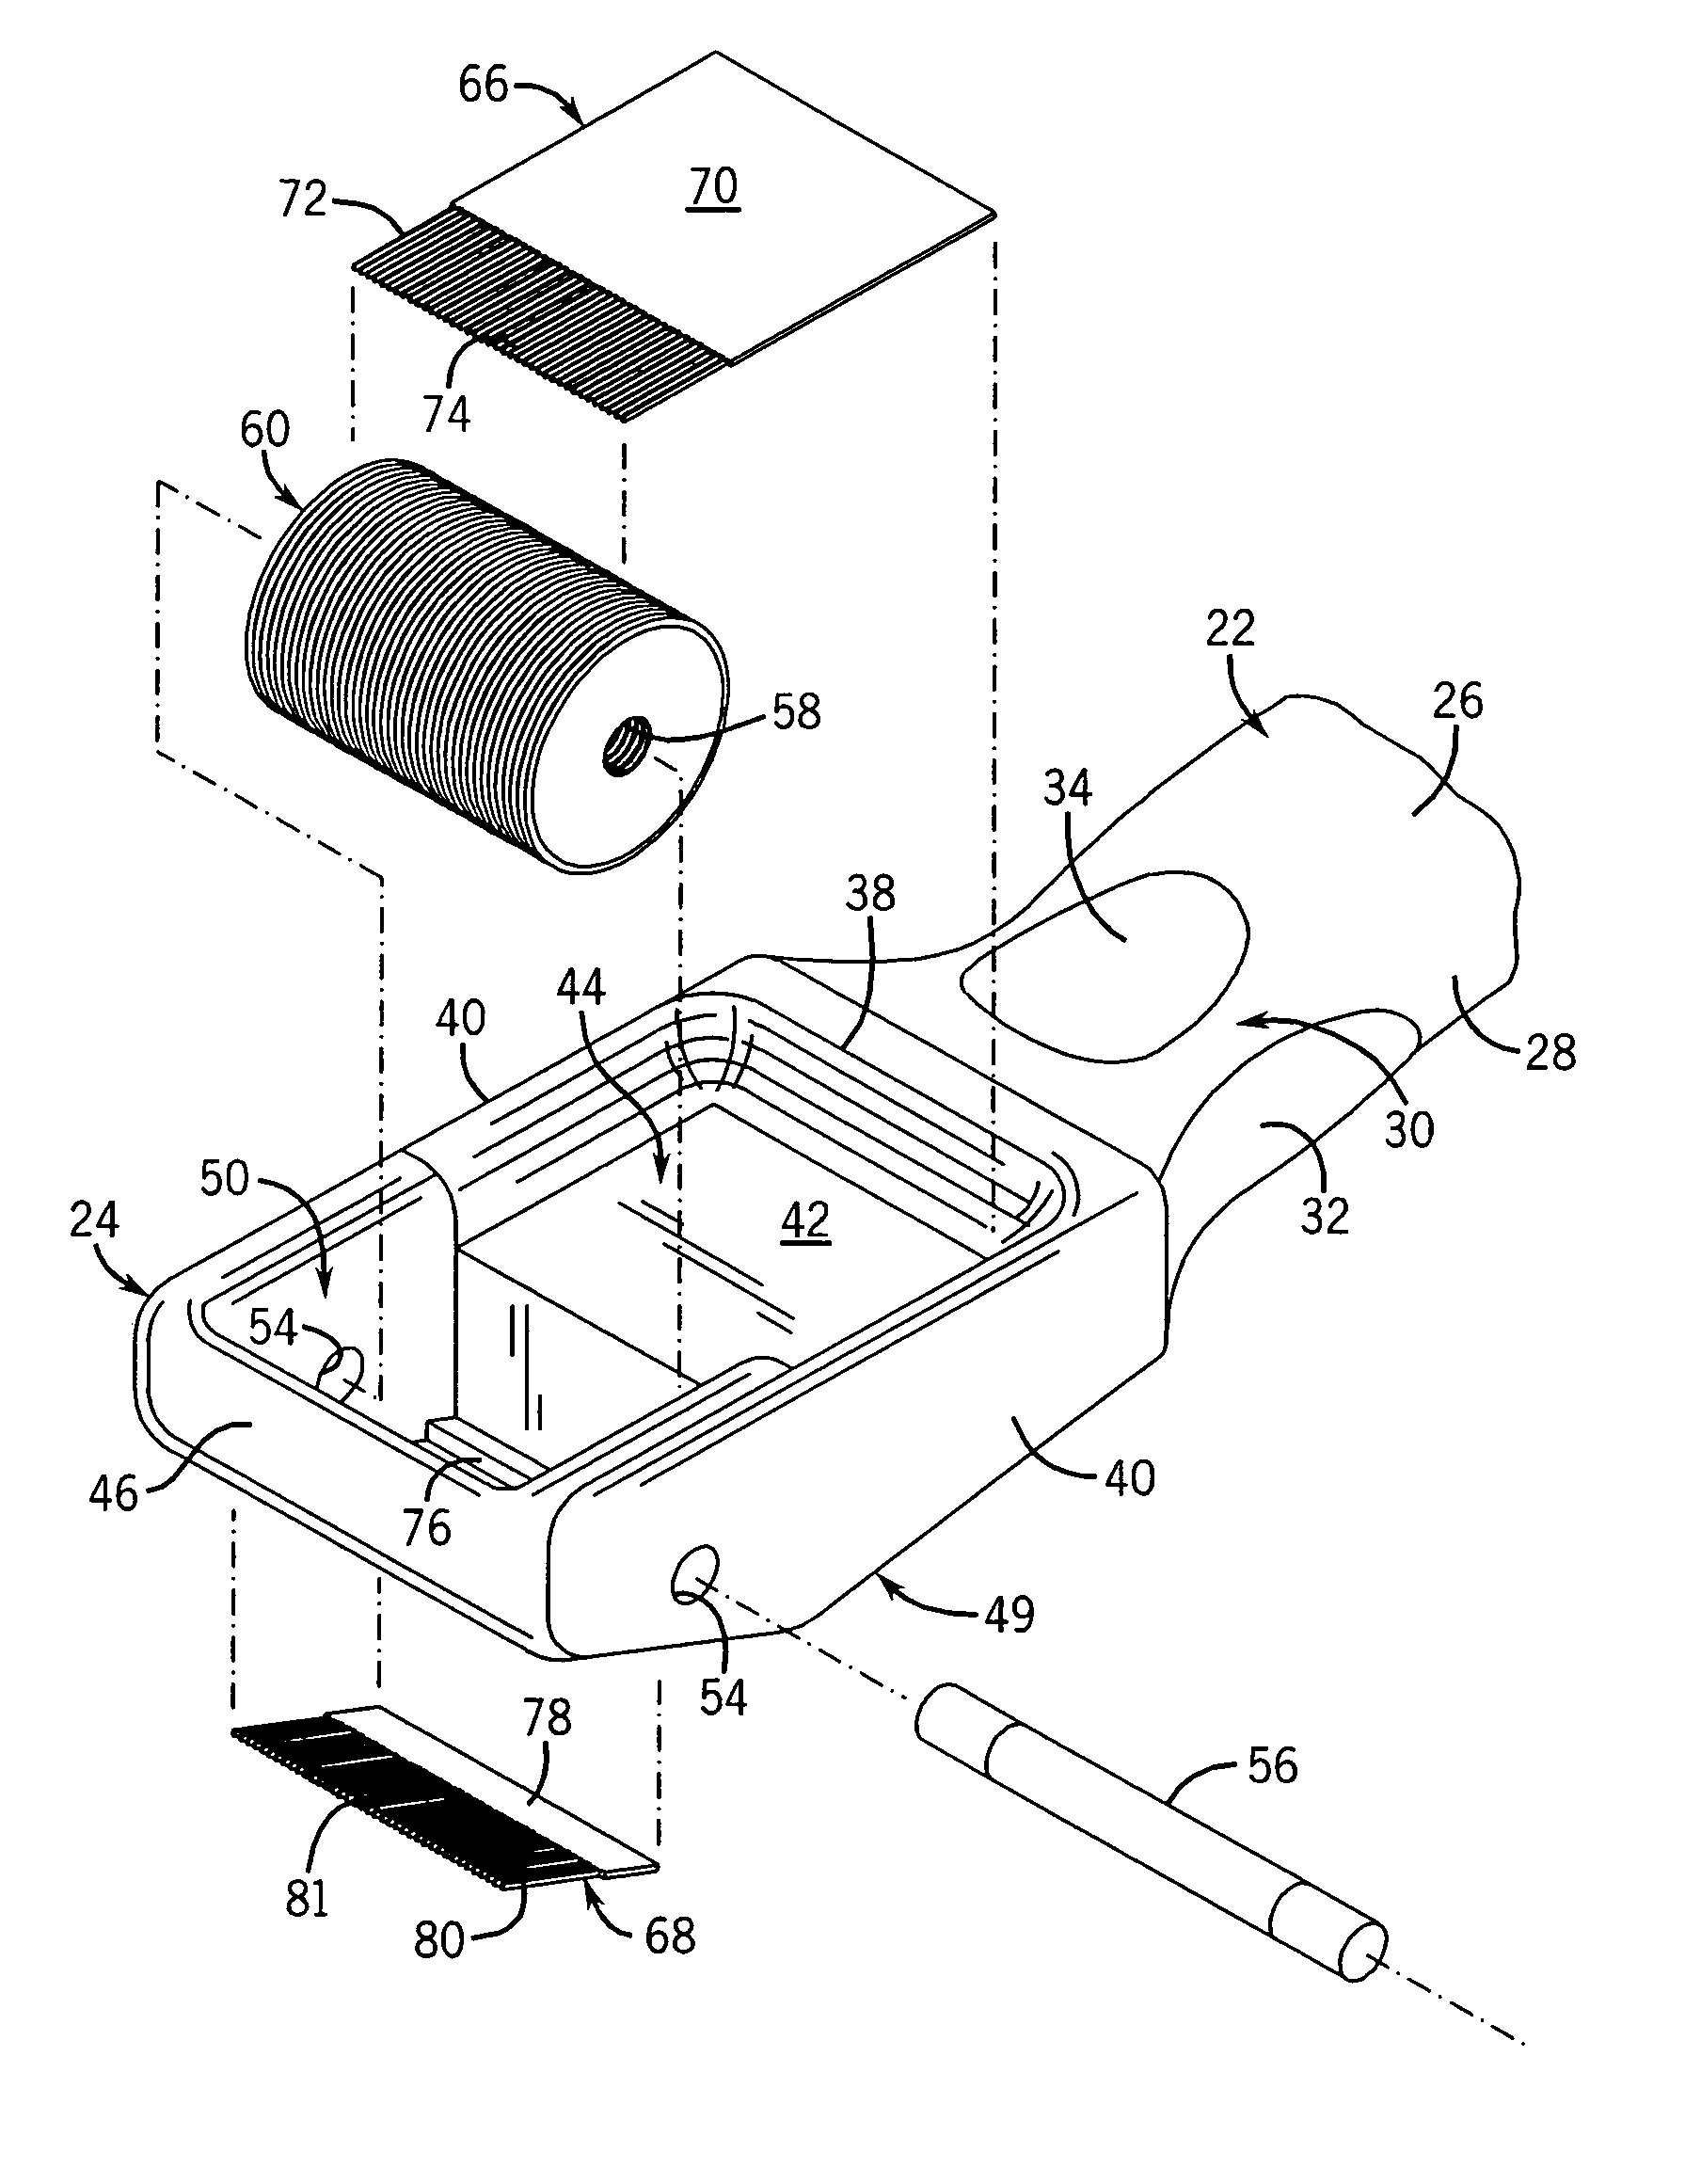 Method and apparatus for processing dermal tissue